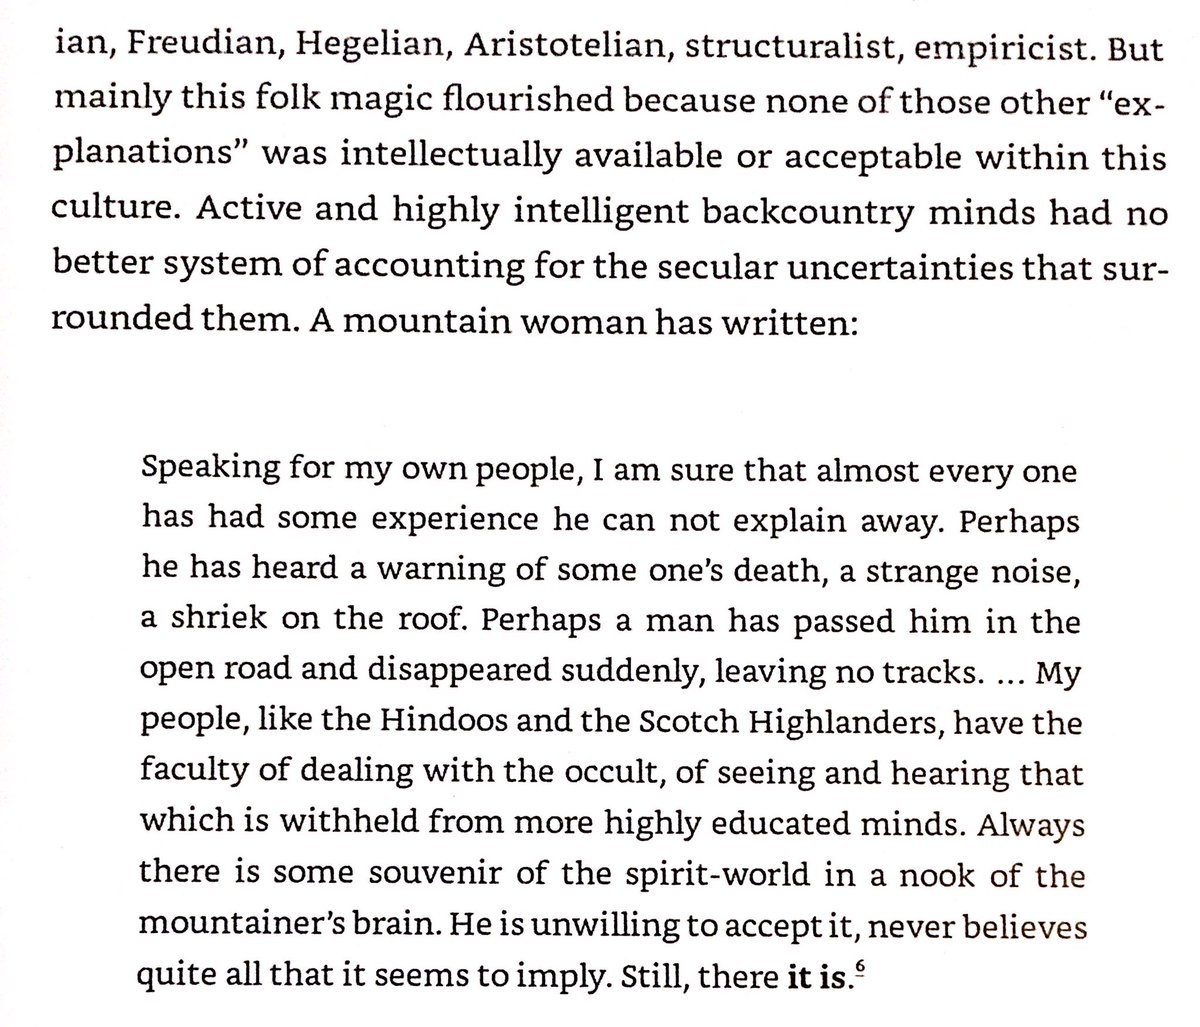 Scots-Irish woman in Appalachia describes her people’s interest in superstition. Reminds me of one of Pechorin’s thoughts in “Hero of Our Time” - Lermontov must have remembered part of his Scottish heritage.